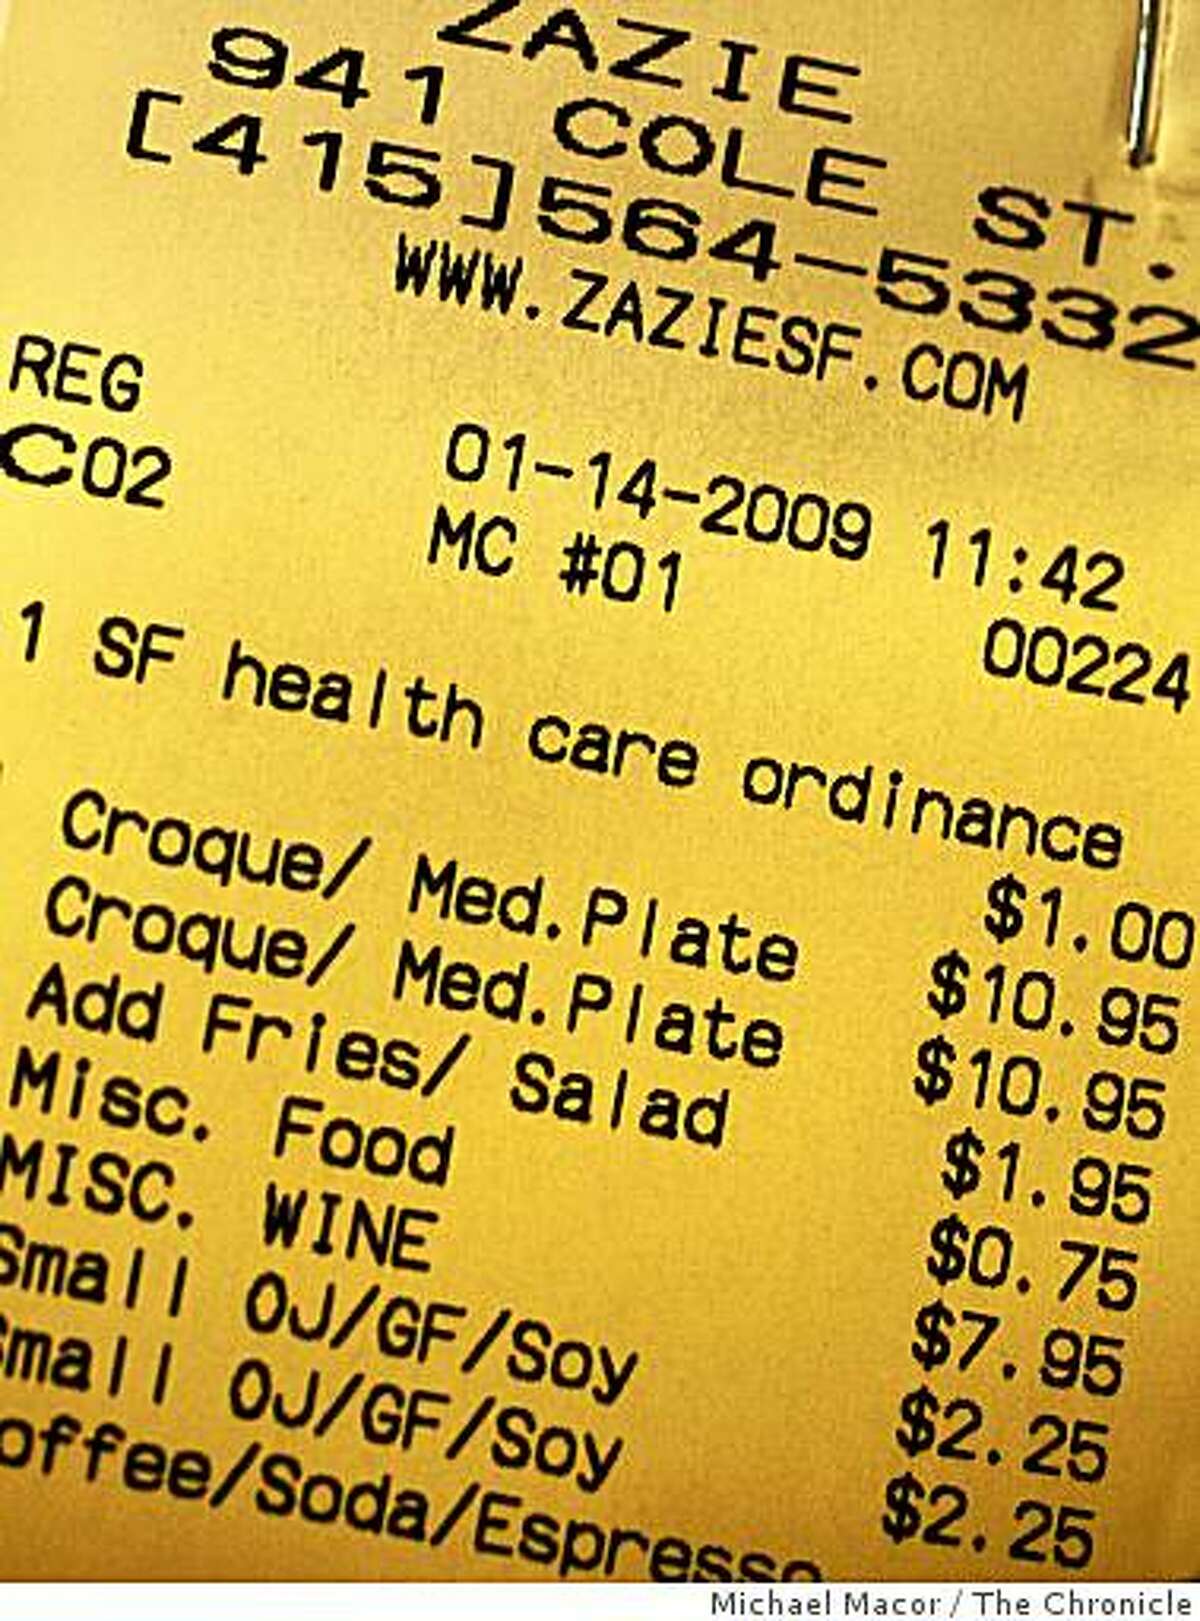 "Zazie" restaurant in the Cole Valleyt district of San Francisco, Calif. Owner Jennifer Paillet provides the required health care to her employees by adding a surcharge of $1 per customer onto each bill and is spelled out clearly for the customers to see on each check.